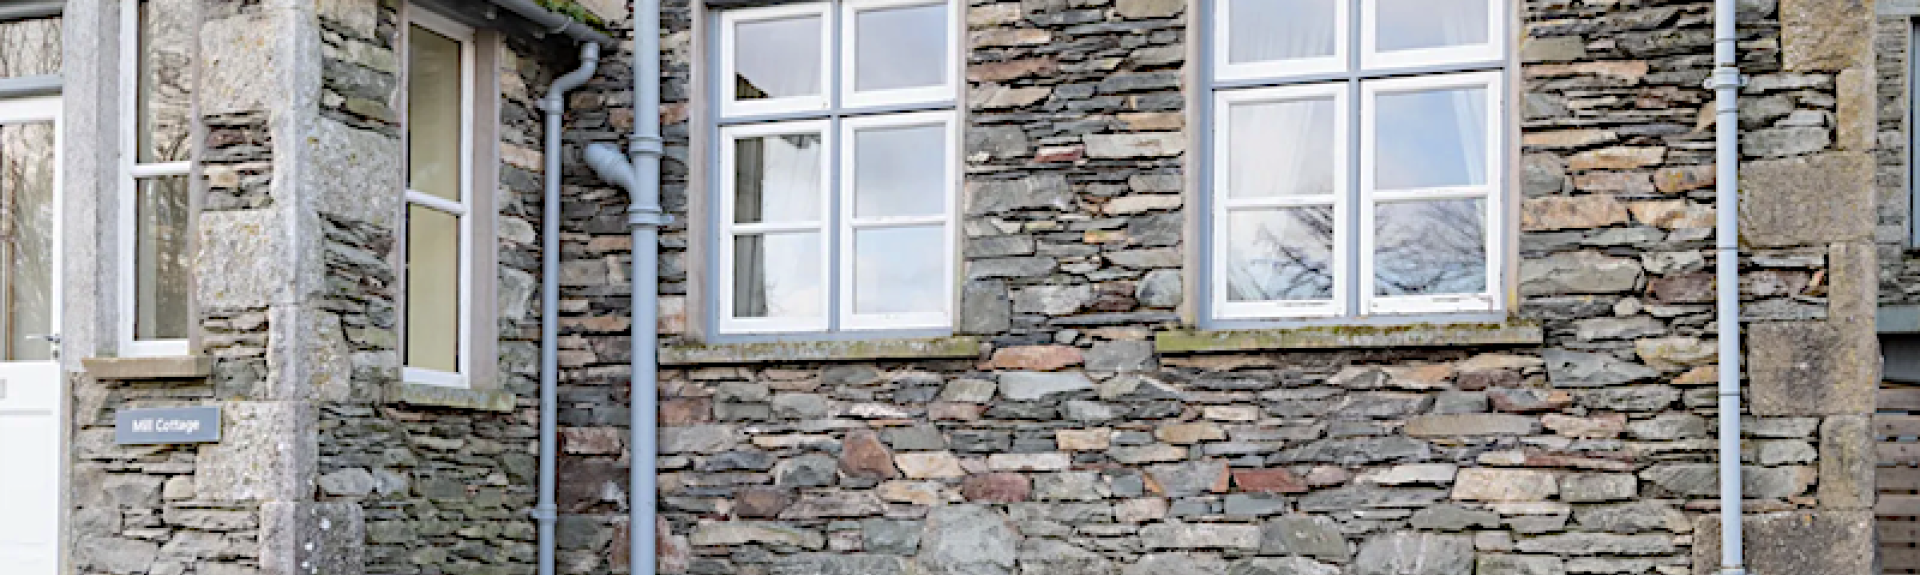 Exterior of a stone-built holiday cottage in the Lake District.